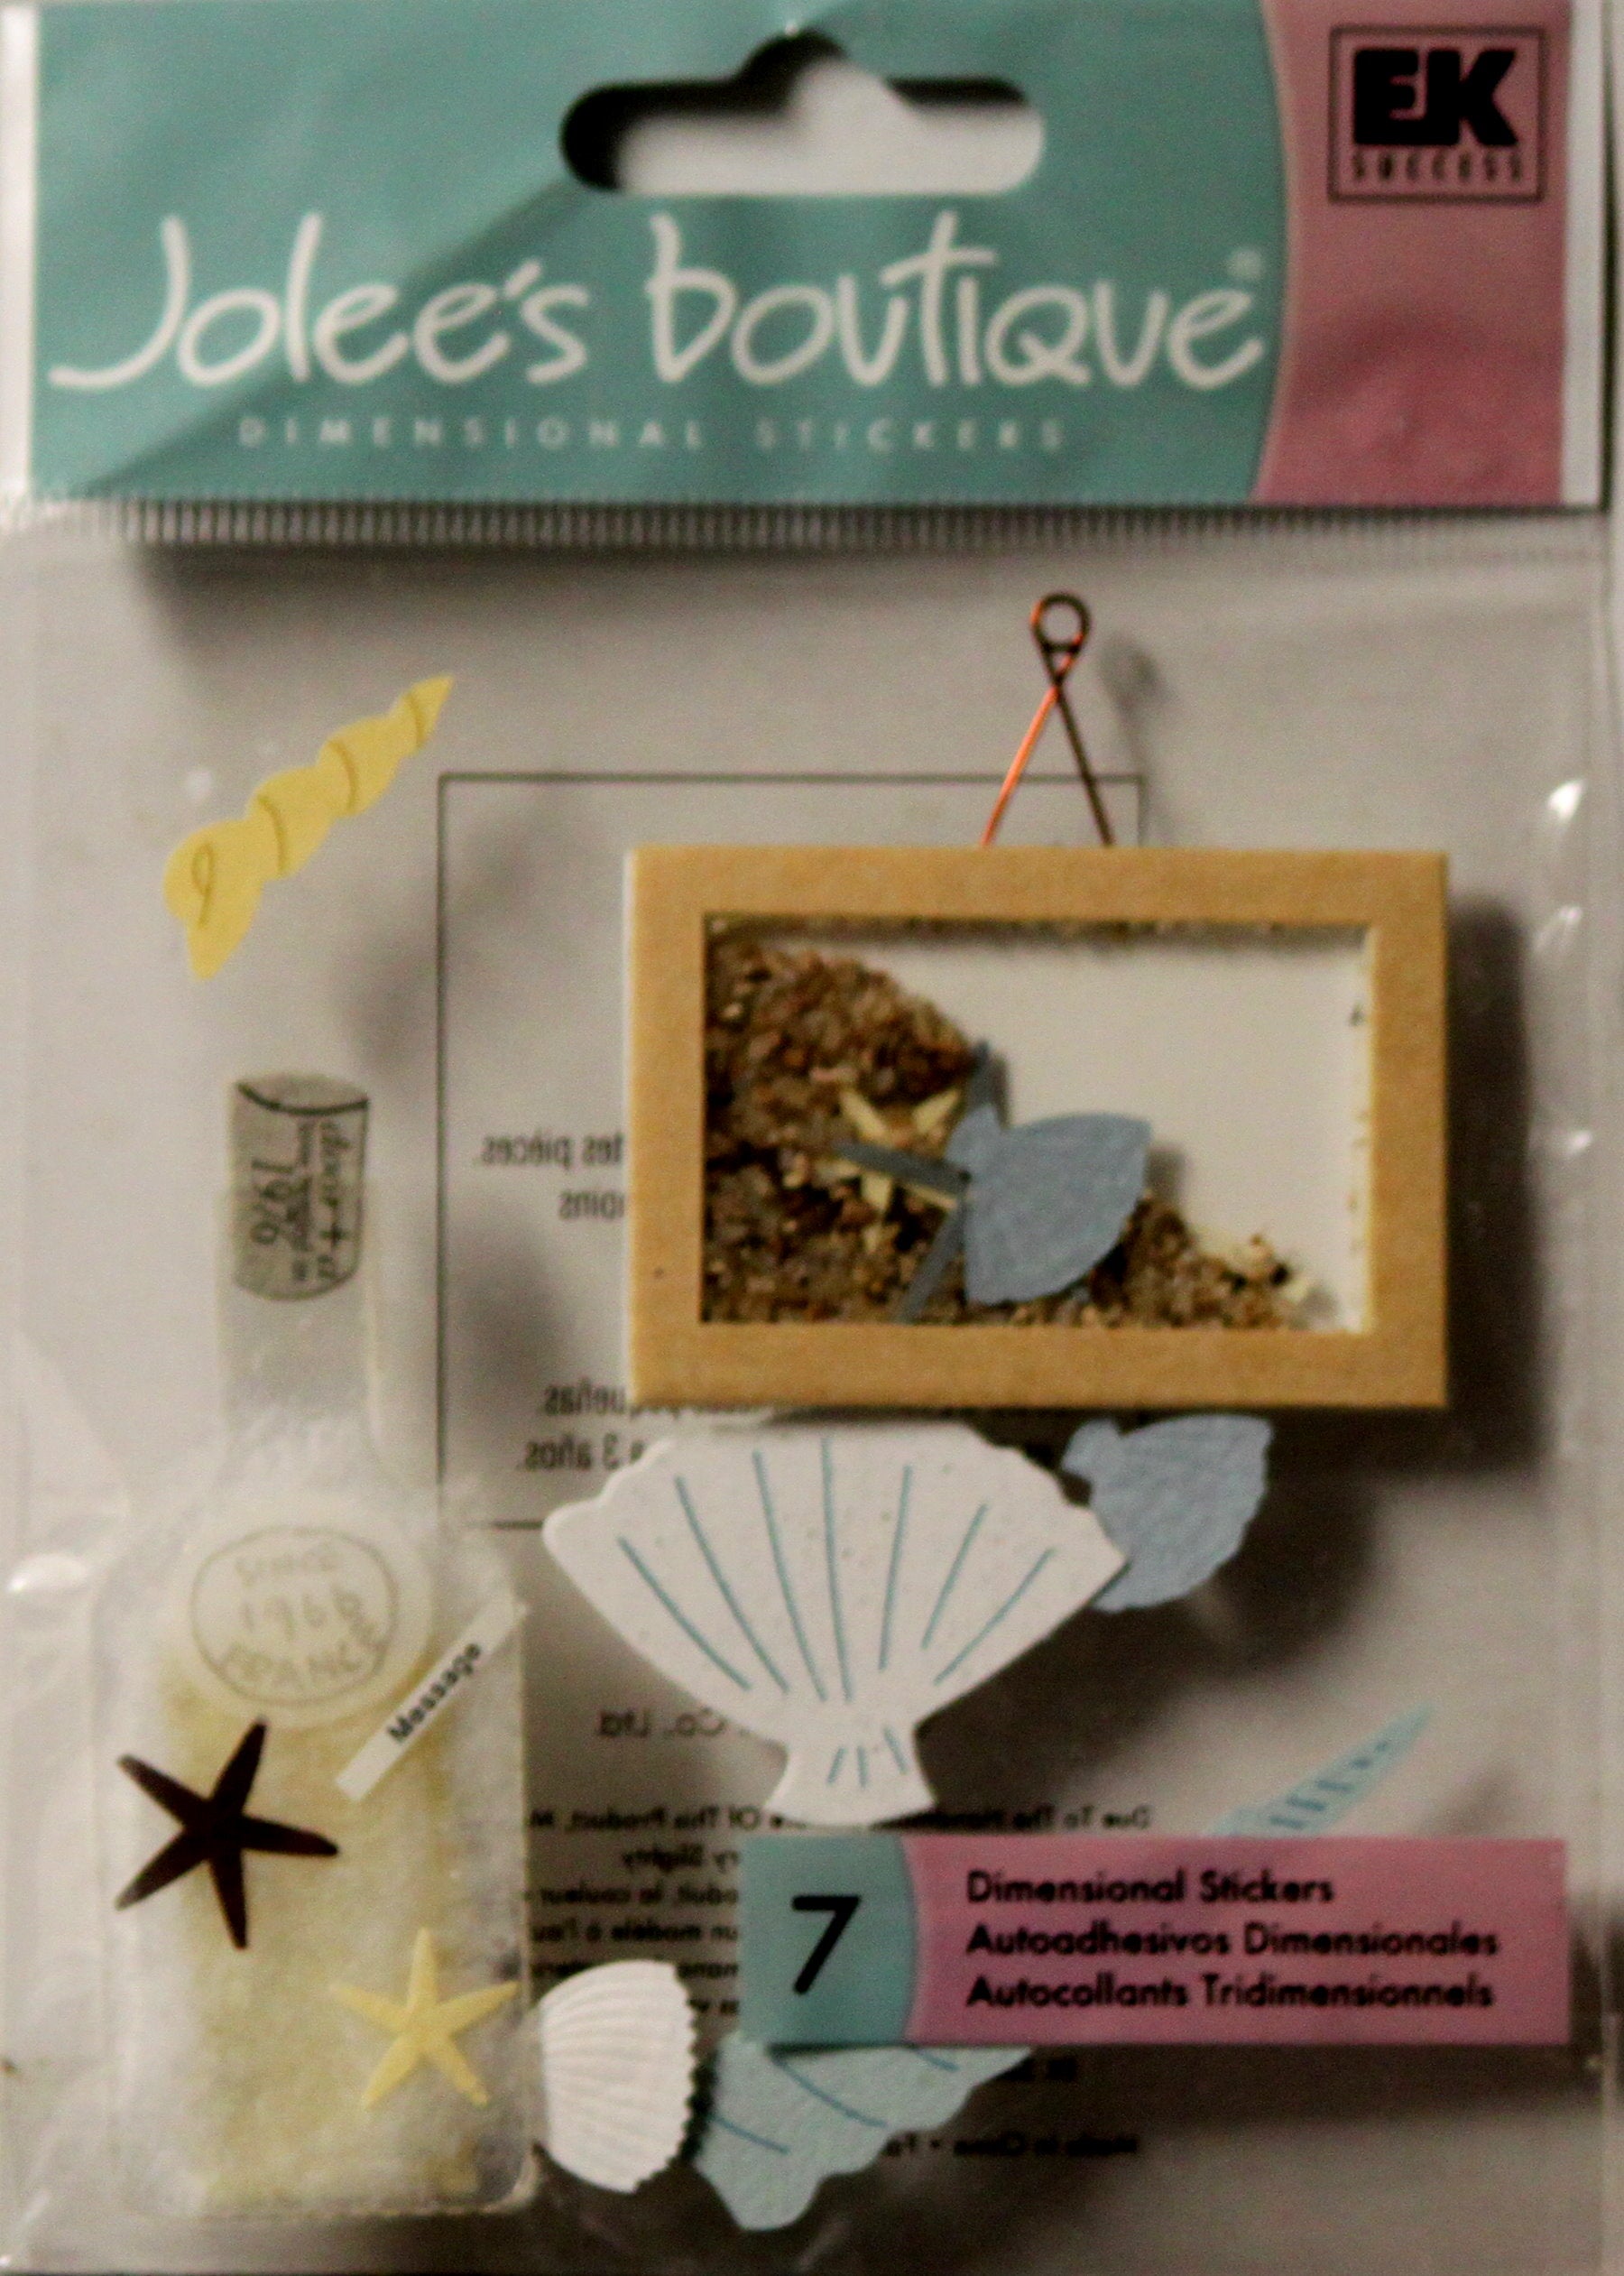 Jolee's Boutique Shore Thoughts Dimensional Stickers